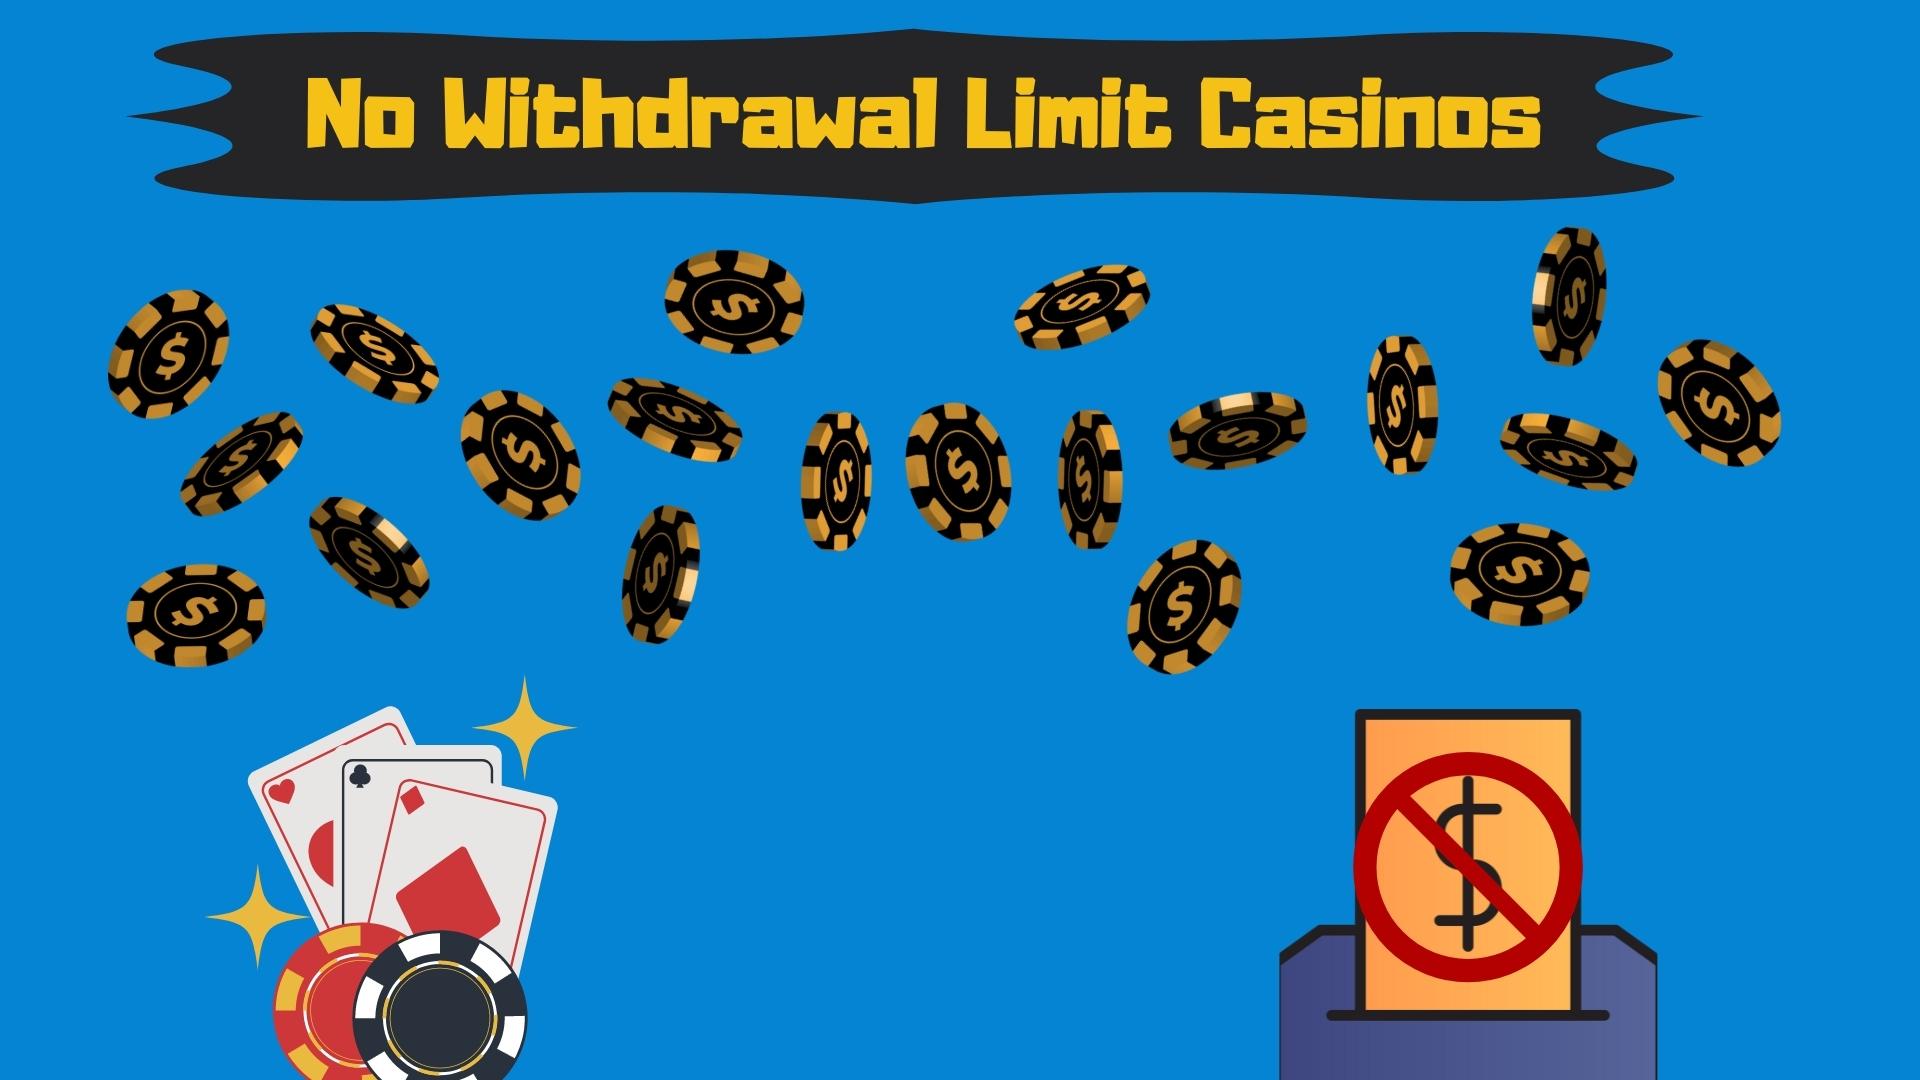 No Withdrawal Limit Casinos Explained